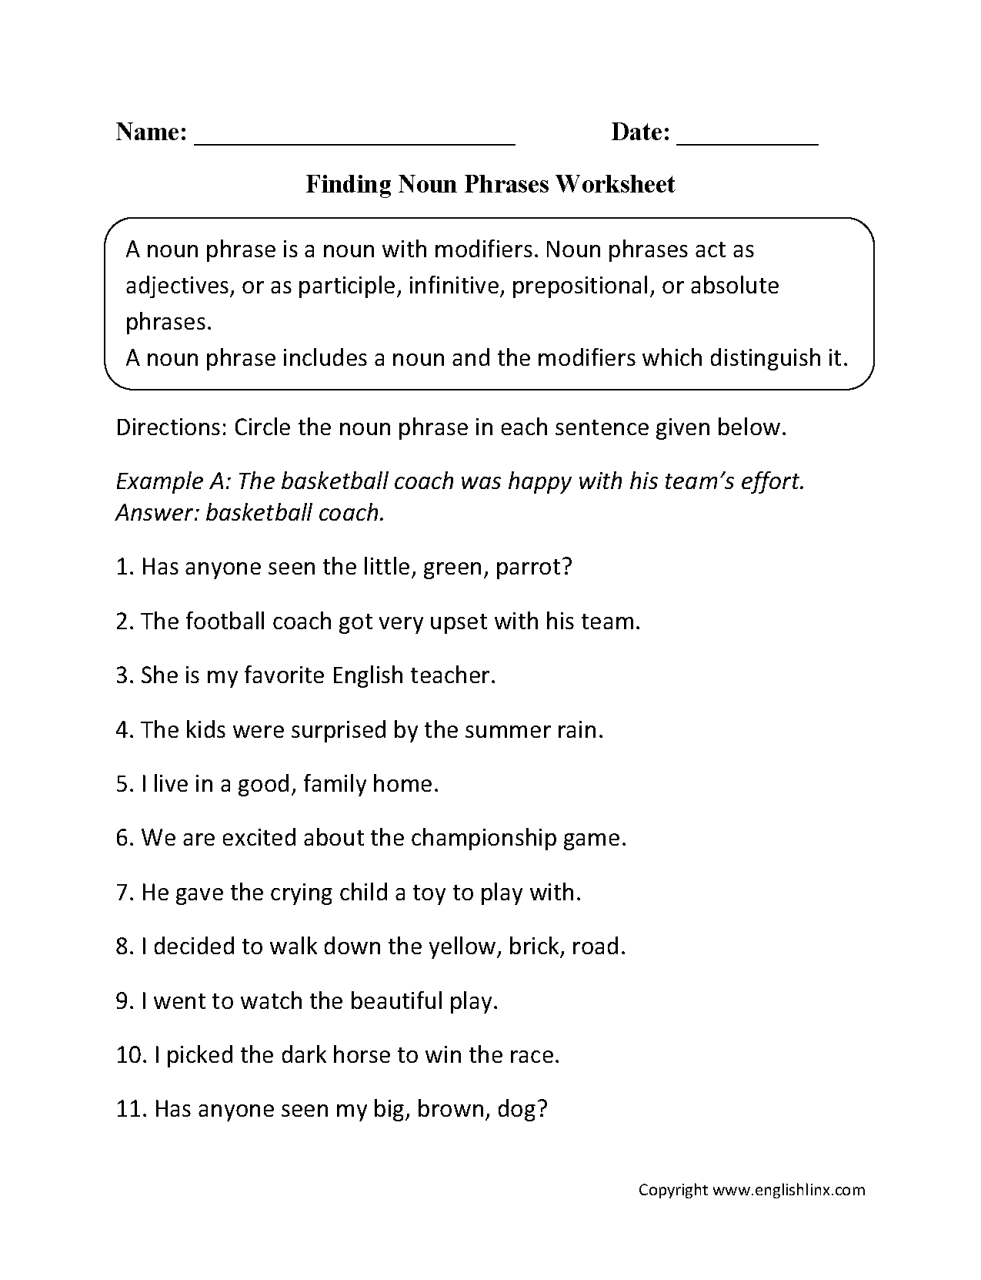 Verb Phrase Worksheet With Answers